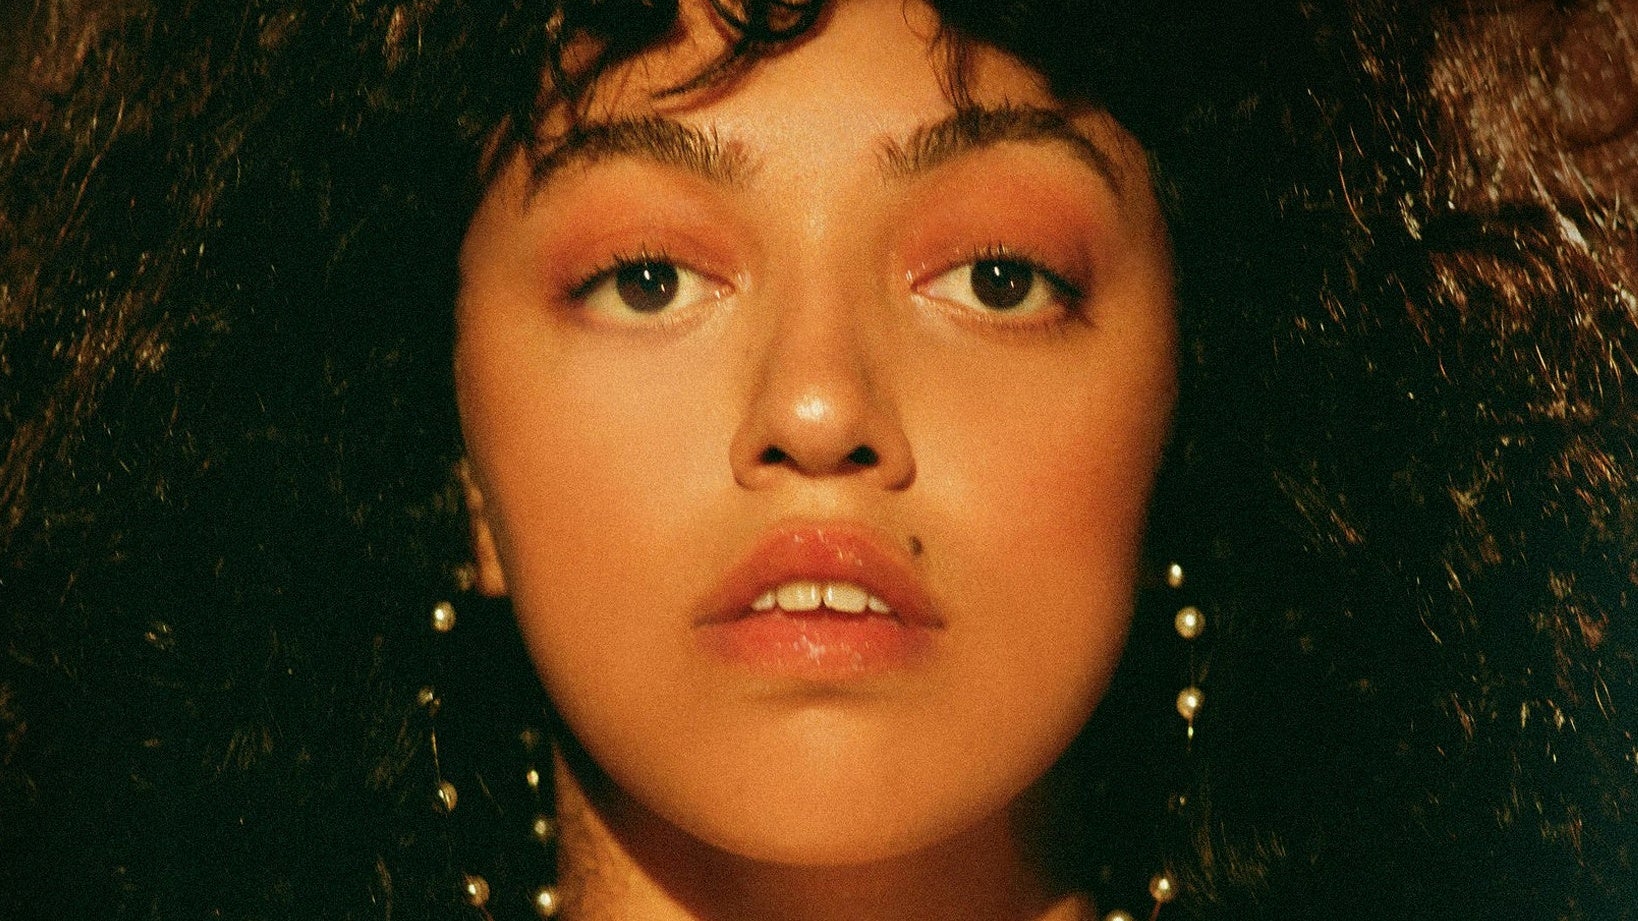 Mahalia on Being Quarantined, Releasing 'Isolation Tapes' and Rediscovering Herself